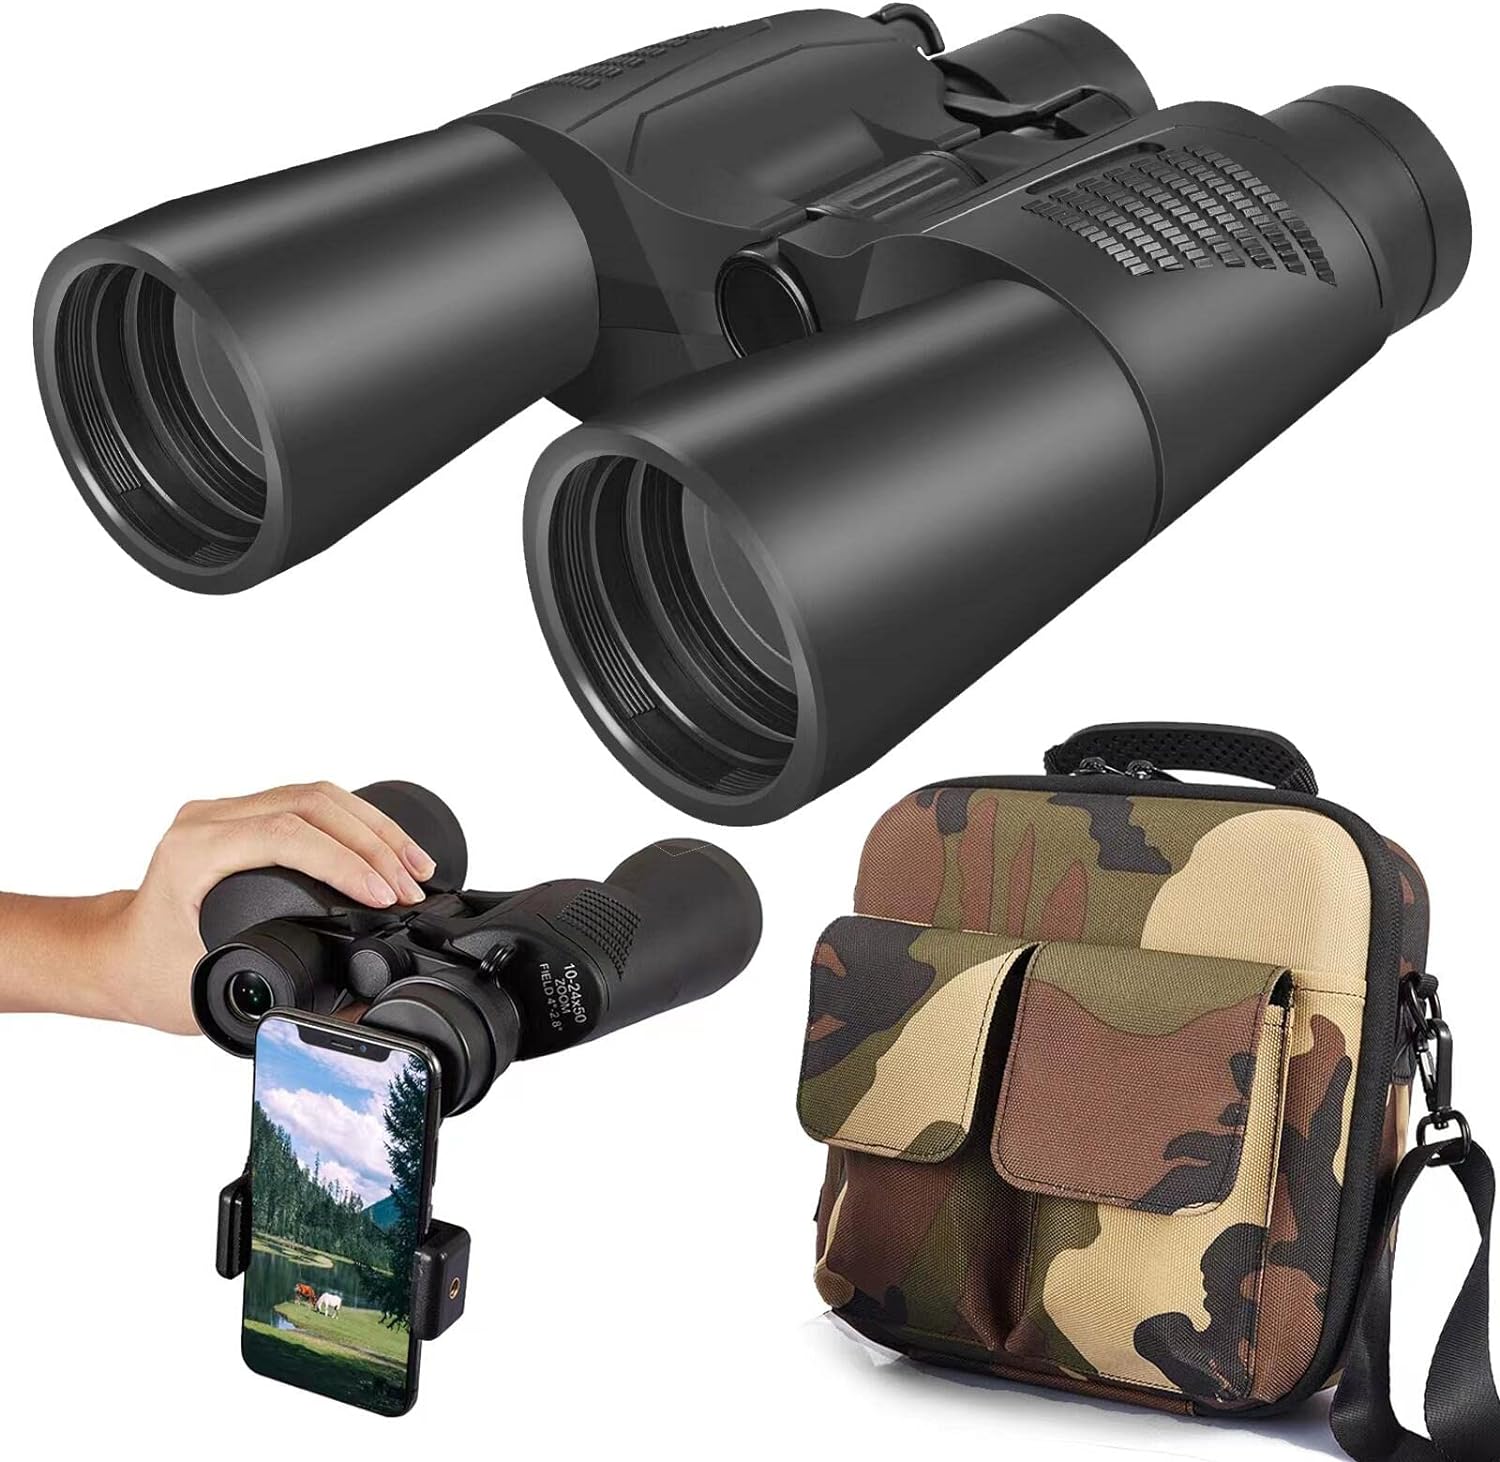 Zoom Binoculars for Adults,10-24x50 Binoculars with Smartphone Adapter, Compact Waterproof Binoculars for Bird Watching Hunting Travel Football Games Stargazing with Carrying Case and Strap